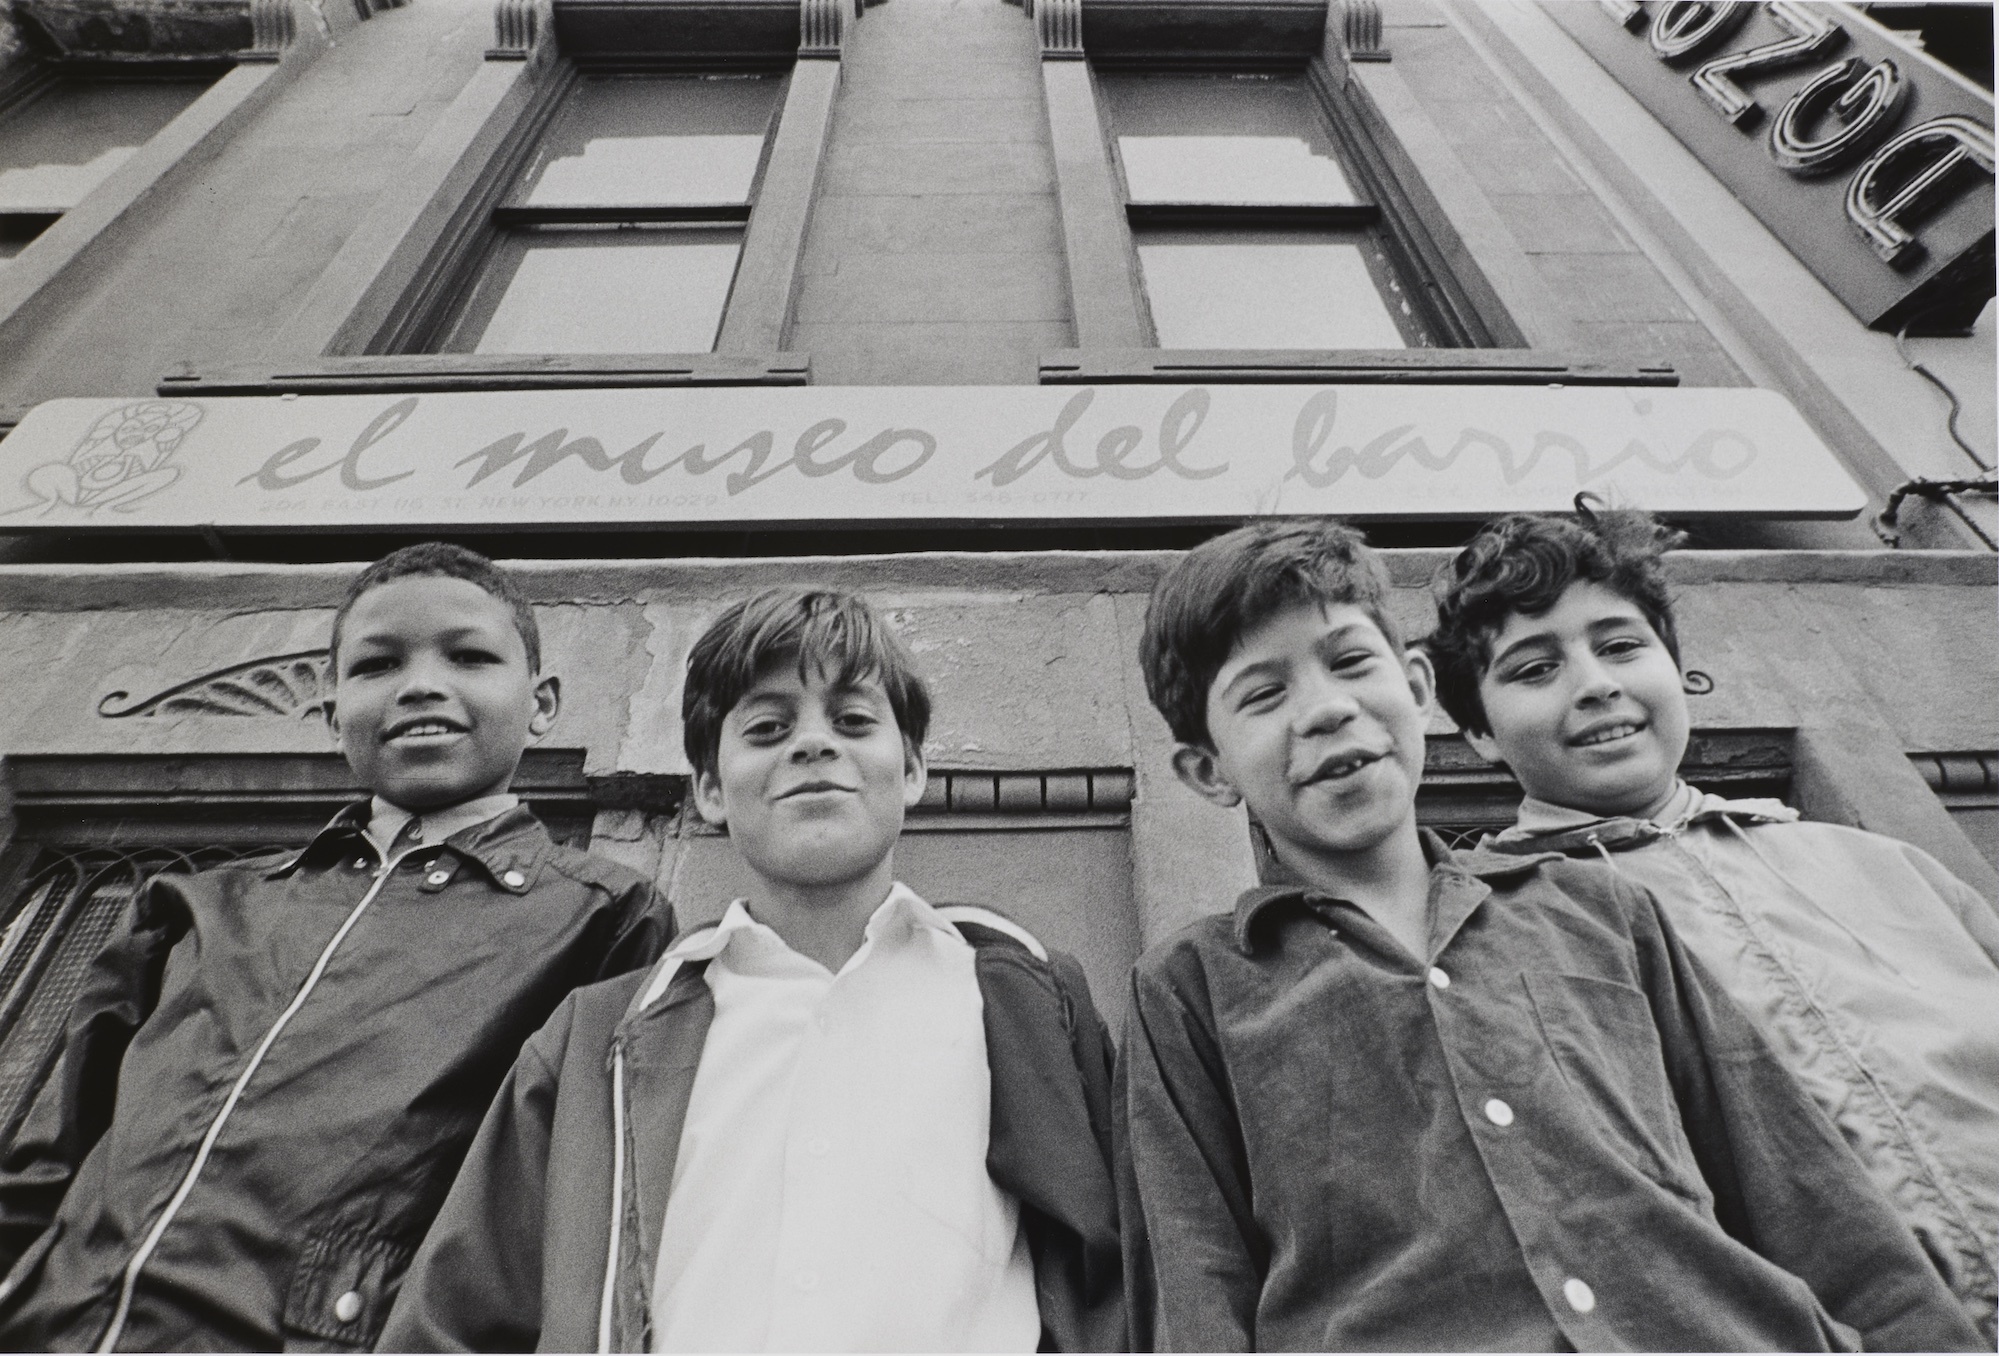 Four children outside of El Museo del Barrio, P.S. 206, 508 East 120th Street, New York City.